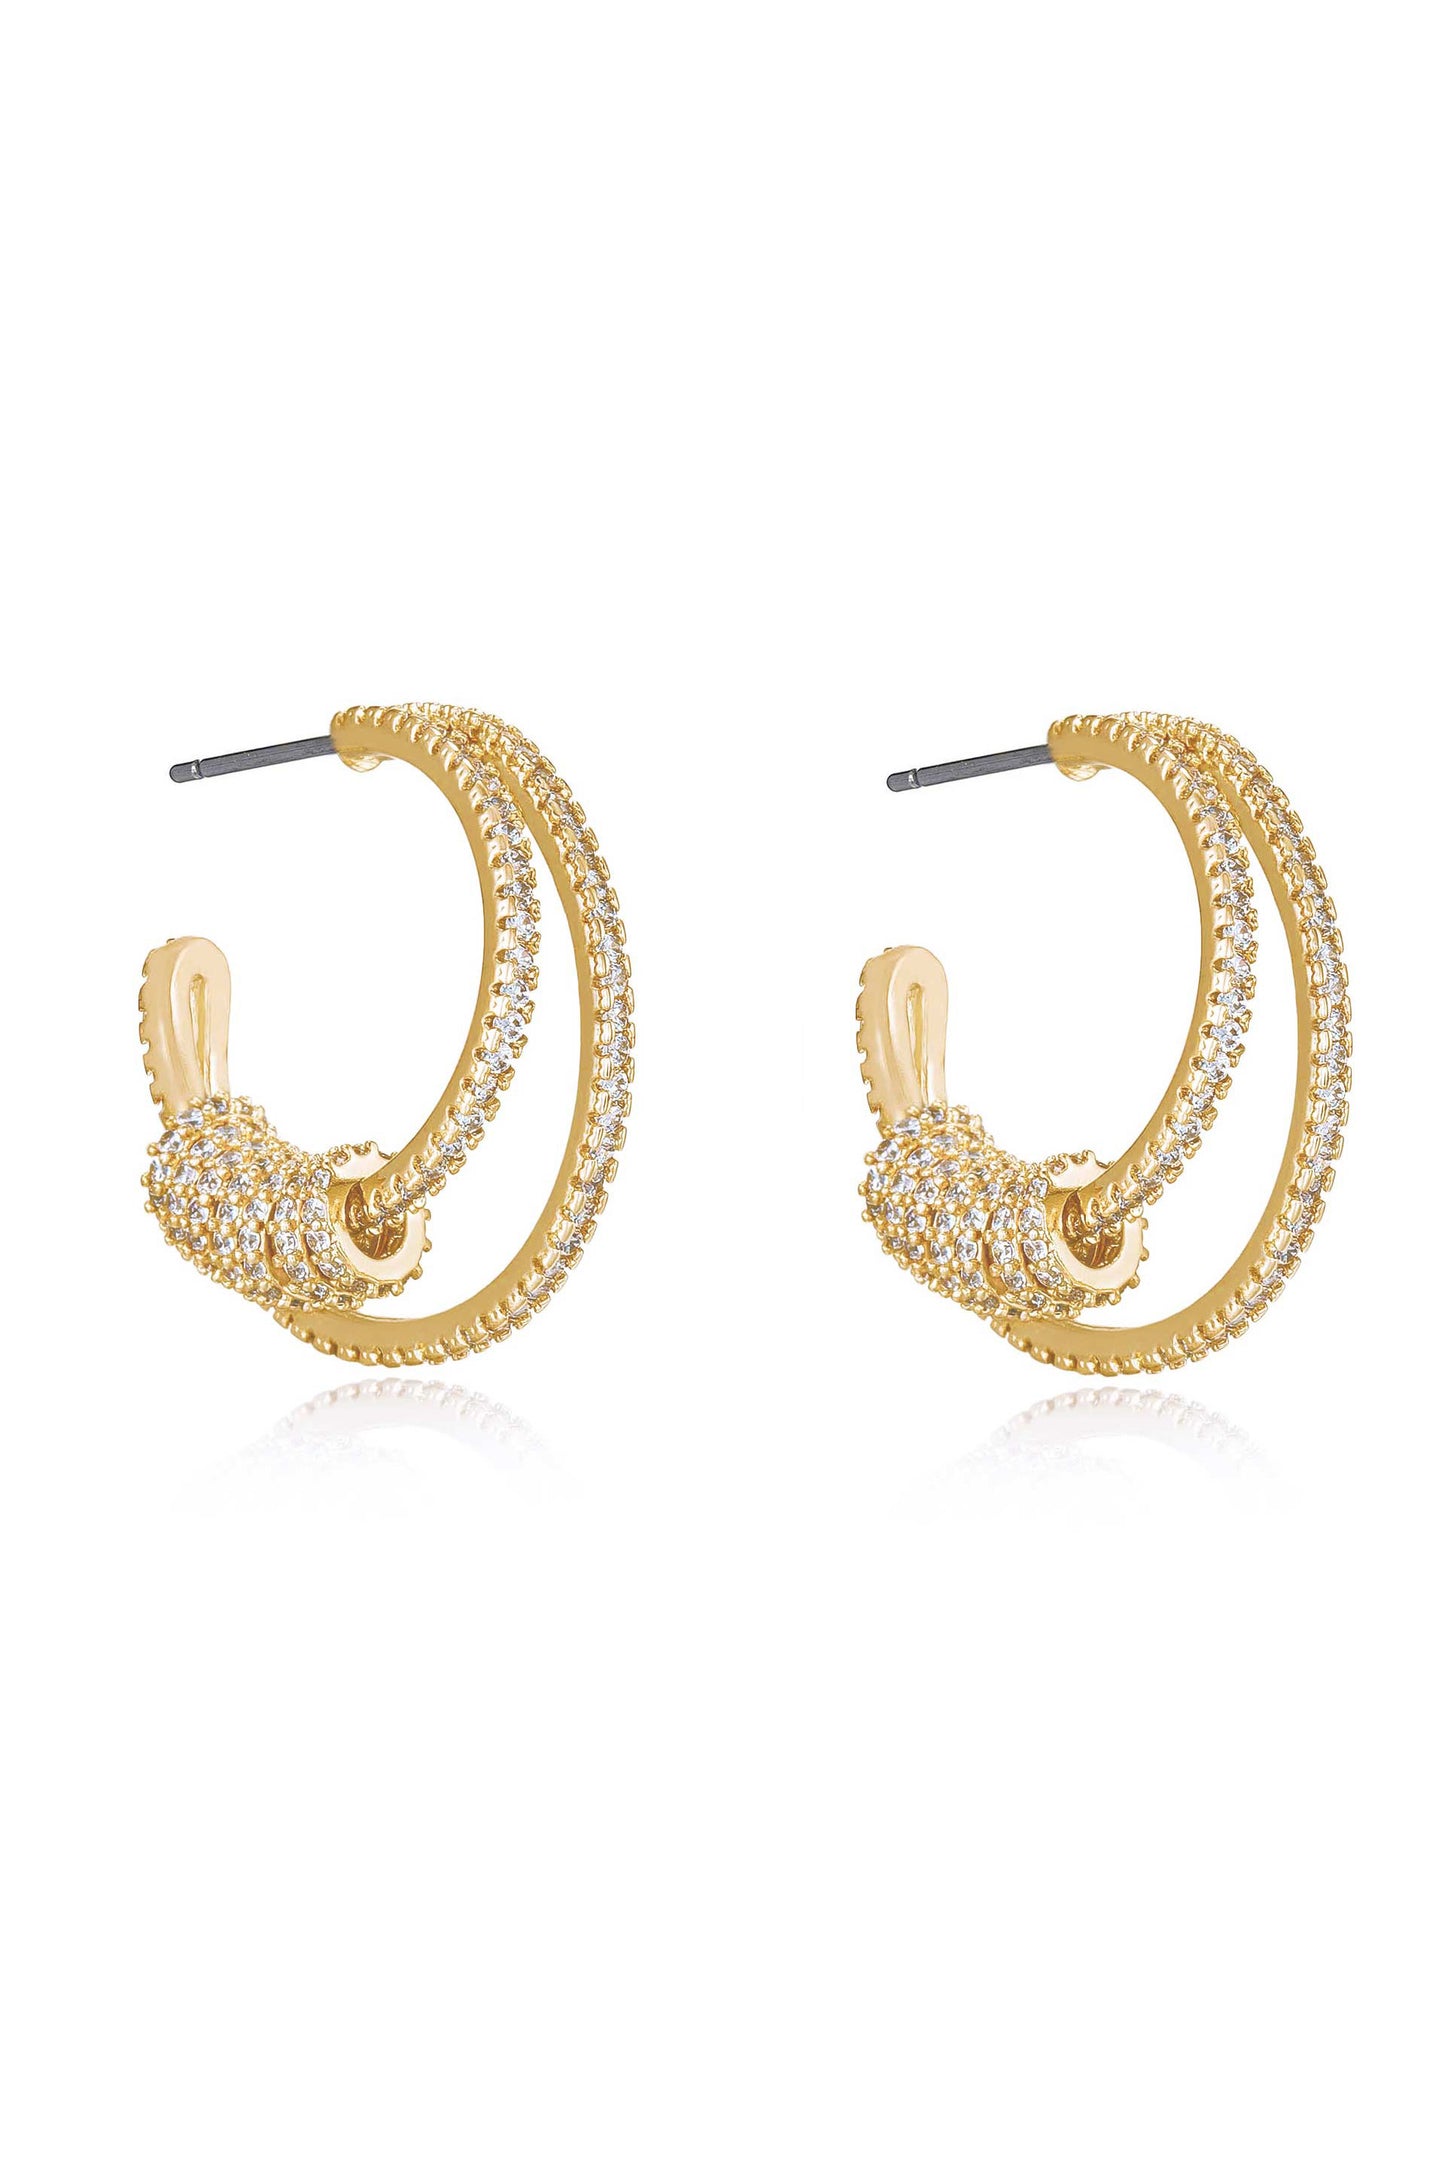 Double Crystal Pave Ring 18k Gold Plated Hoop Earrings side